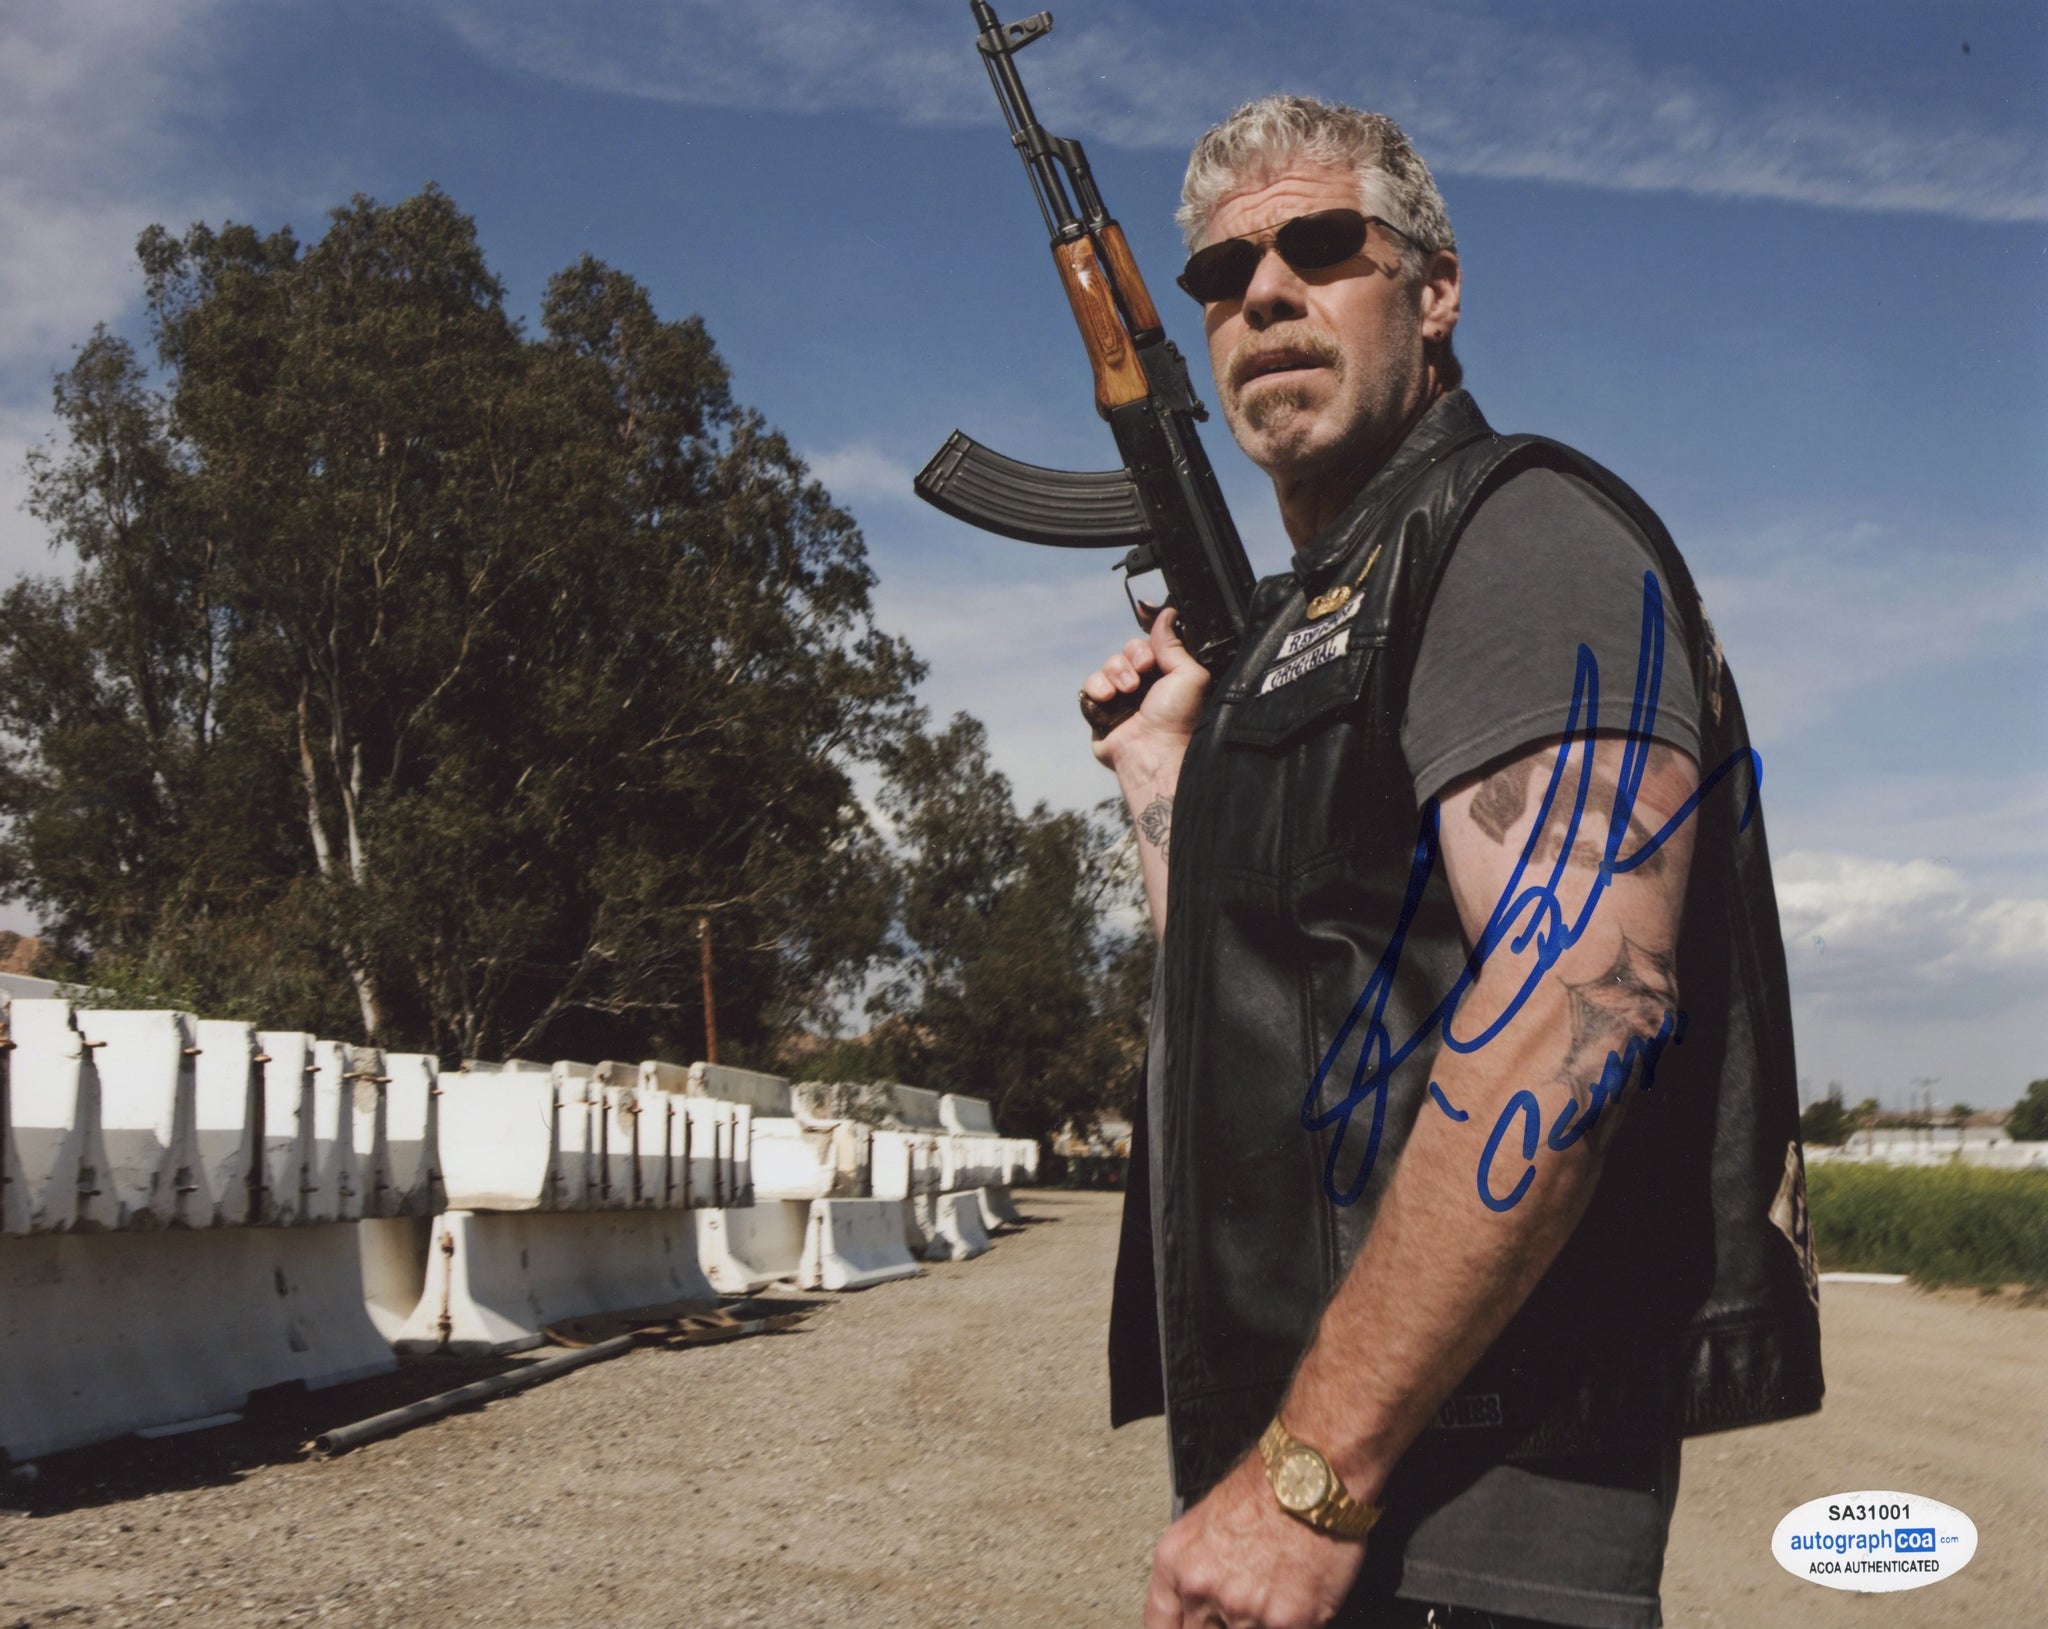 Ron Perlman Sons of Anarchy Signed Autograph 8x10 Photo ACOA - Outlaw Hobbies Authentic Autographs